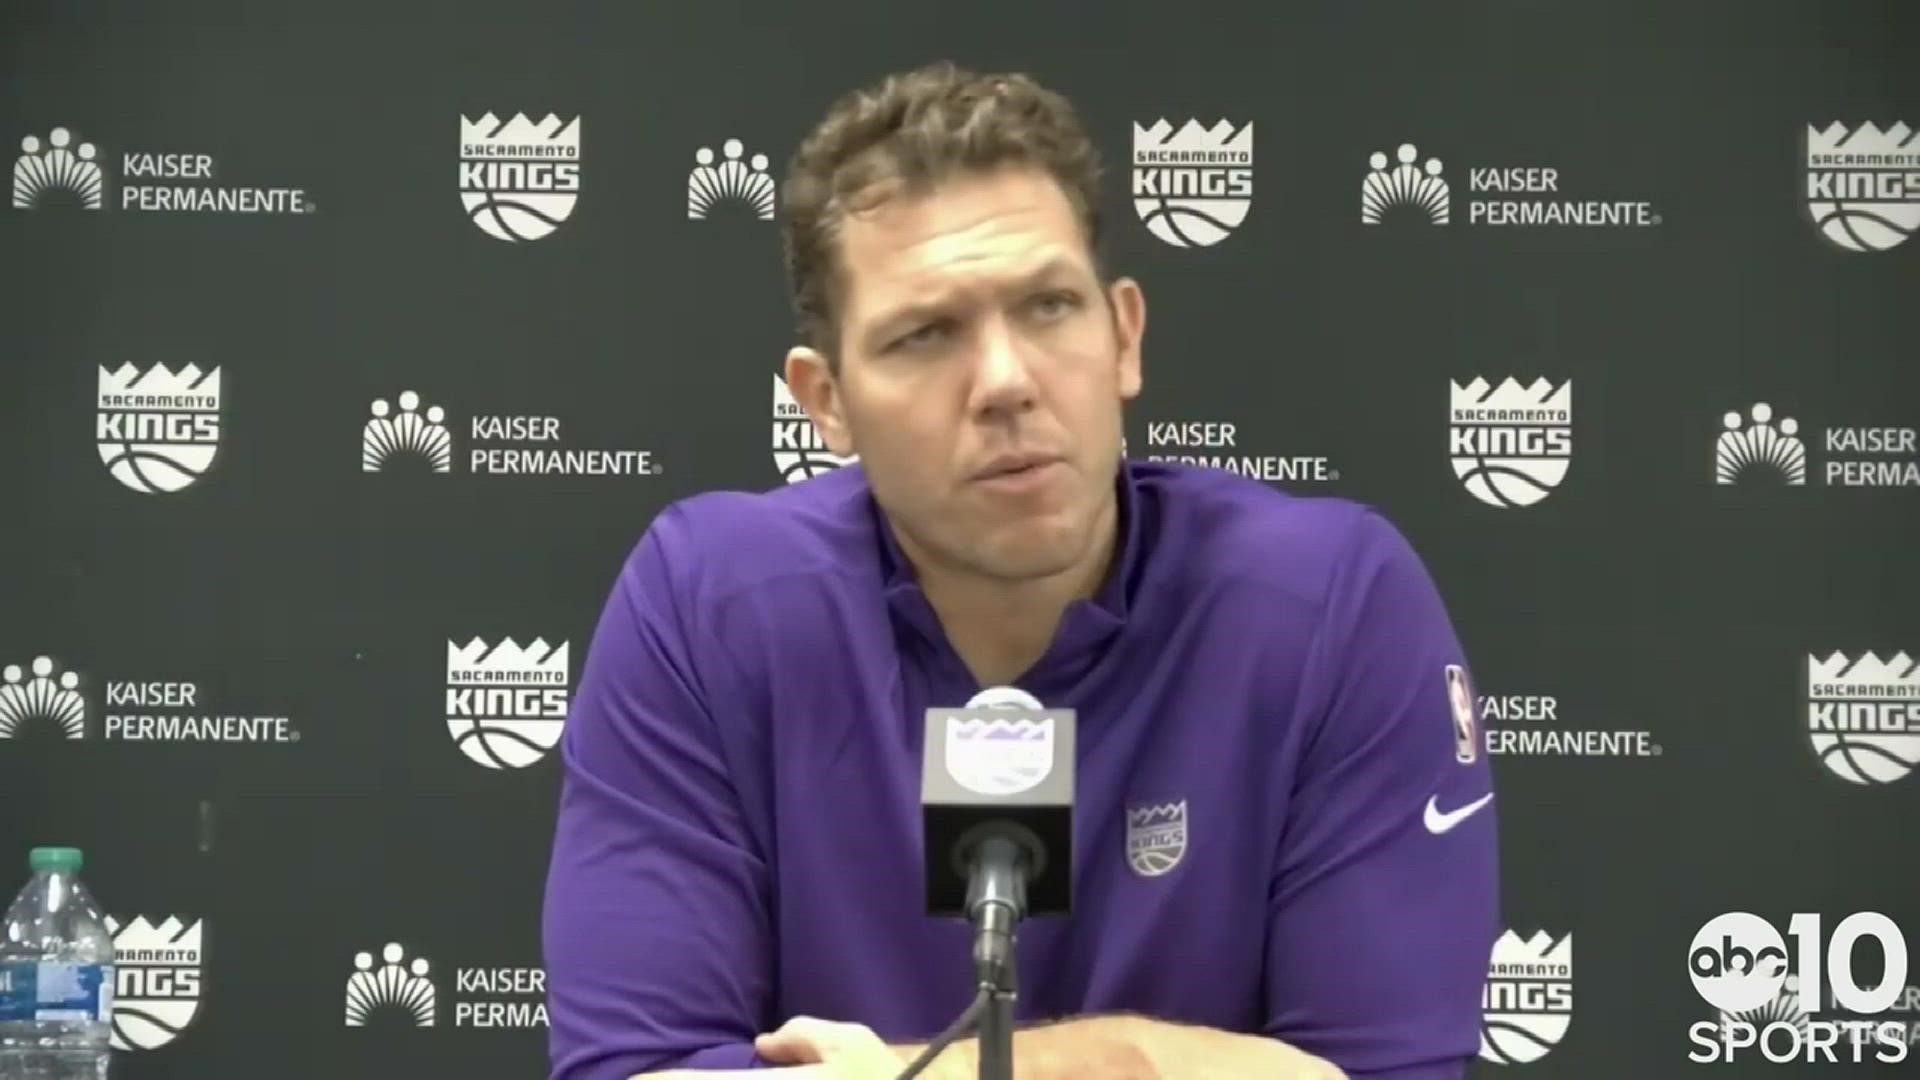 Following Sunday's 119-107 loss to the Golden State Warriors, Kings head coach Luke Walton chides his team's mistakes and committing 19 turnovers.